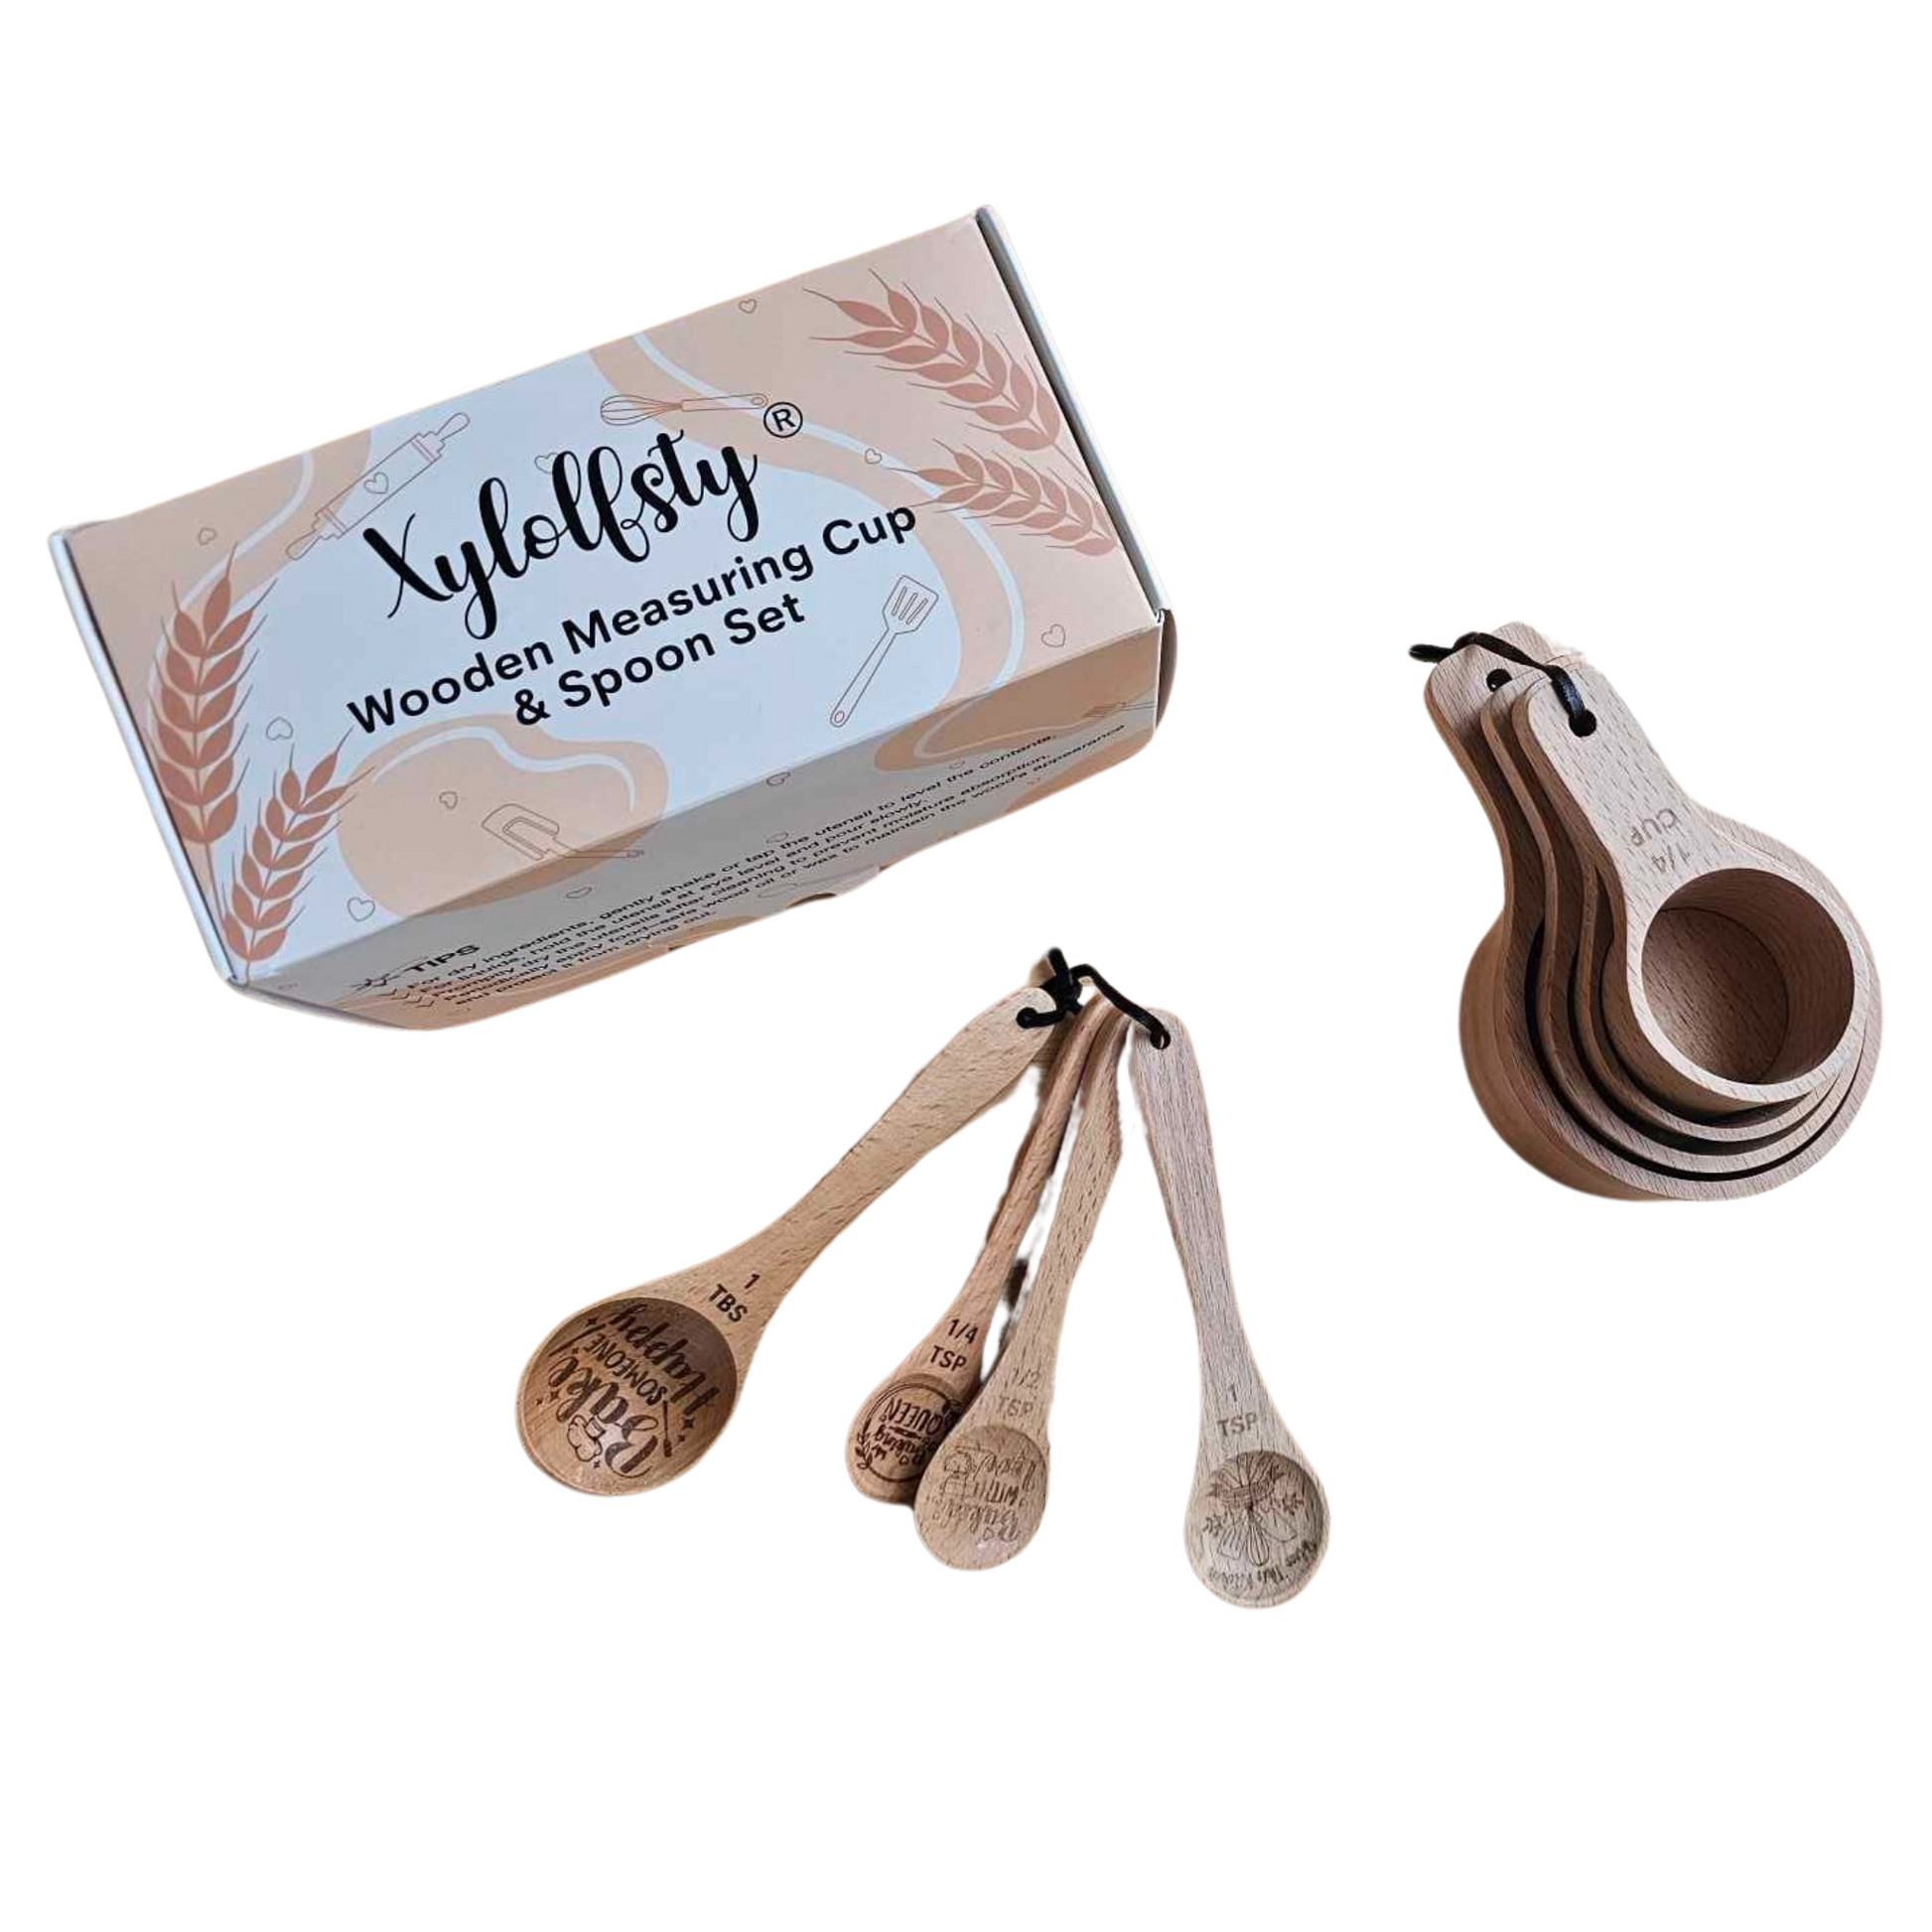 Wooden Measuring Cup and Spoon Set Designed with Baking Quotes